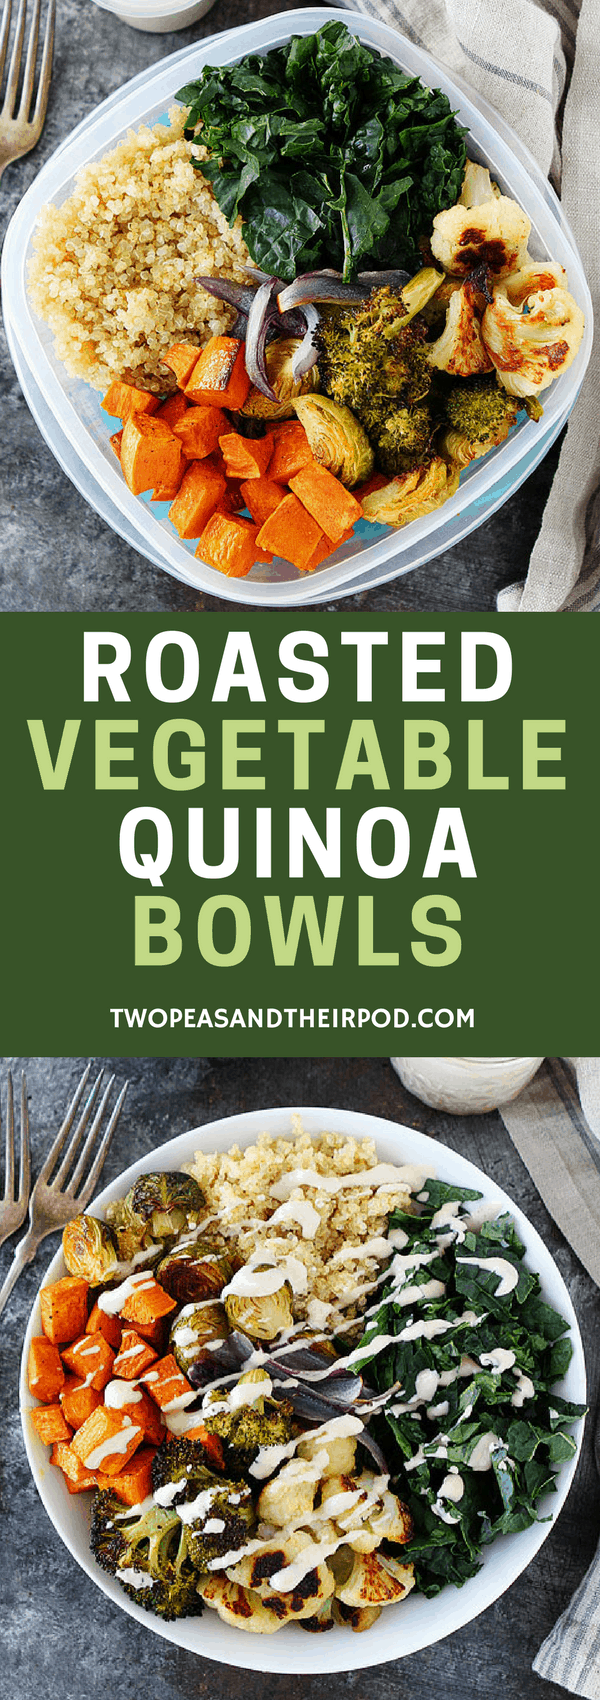 Roasted Vegetable Quinoa Bowls make a great healthy lunch or dinner. You can meal prep and eat all week! #mealprep #vegan #glutenfree #vegetarian #quinoa #easyrecipes